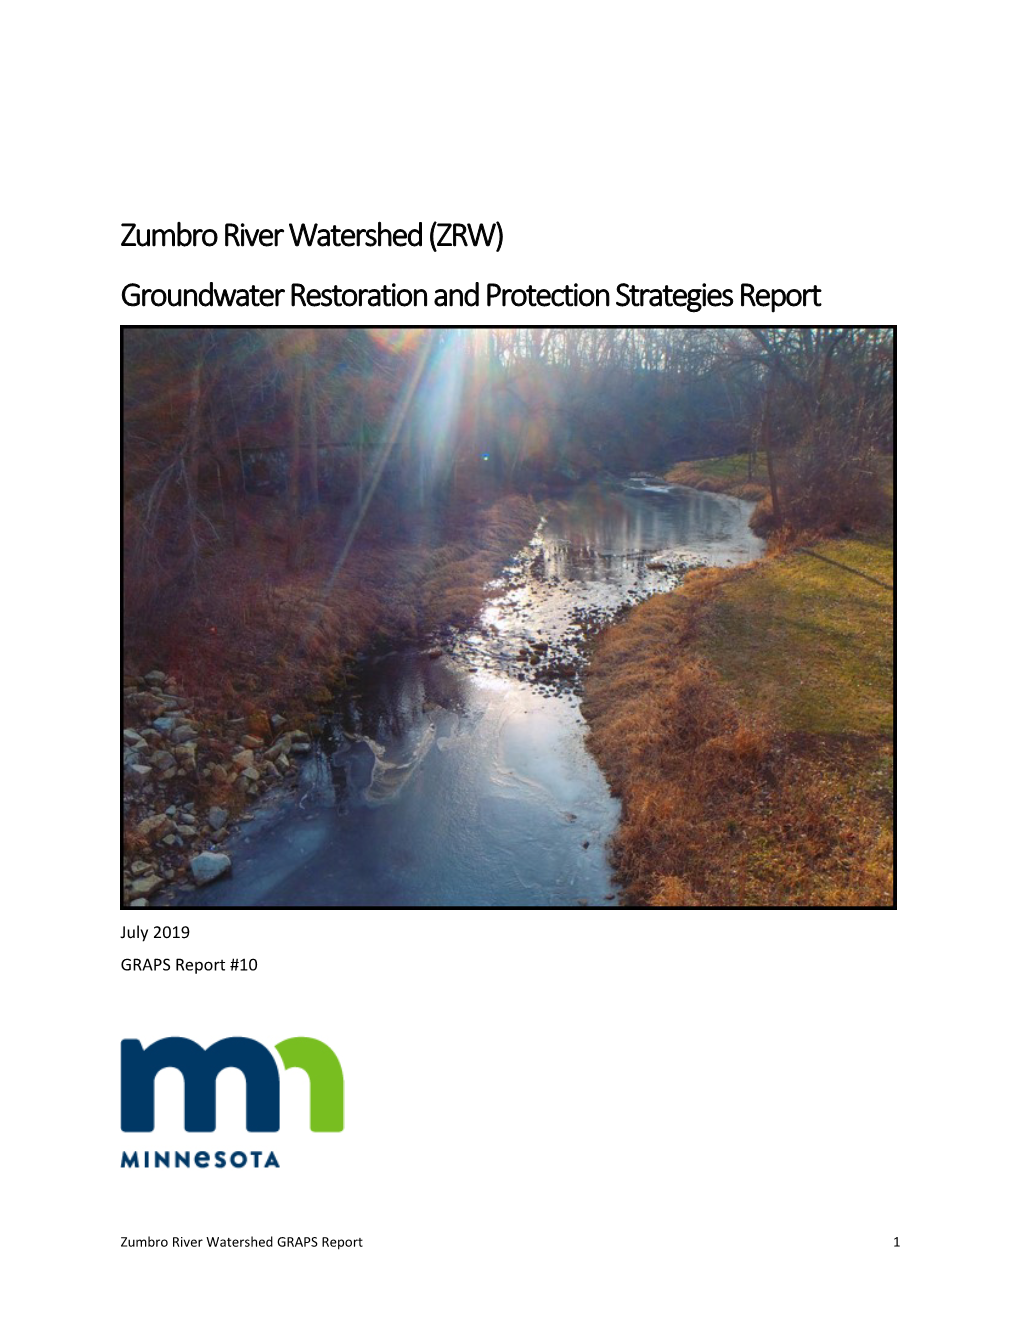 Zumbro River Watershed (ZRW) Groundwater Restoration and Protection Strategies Report